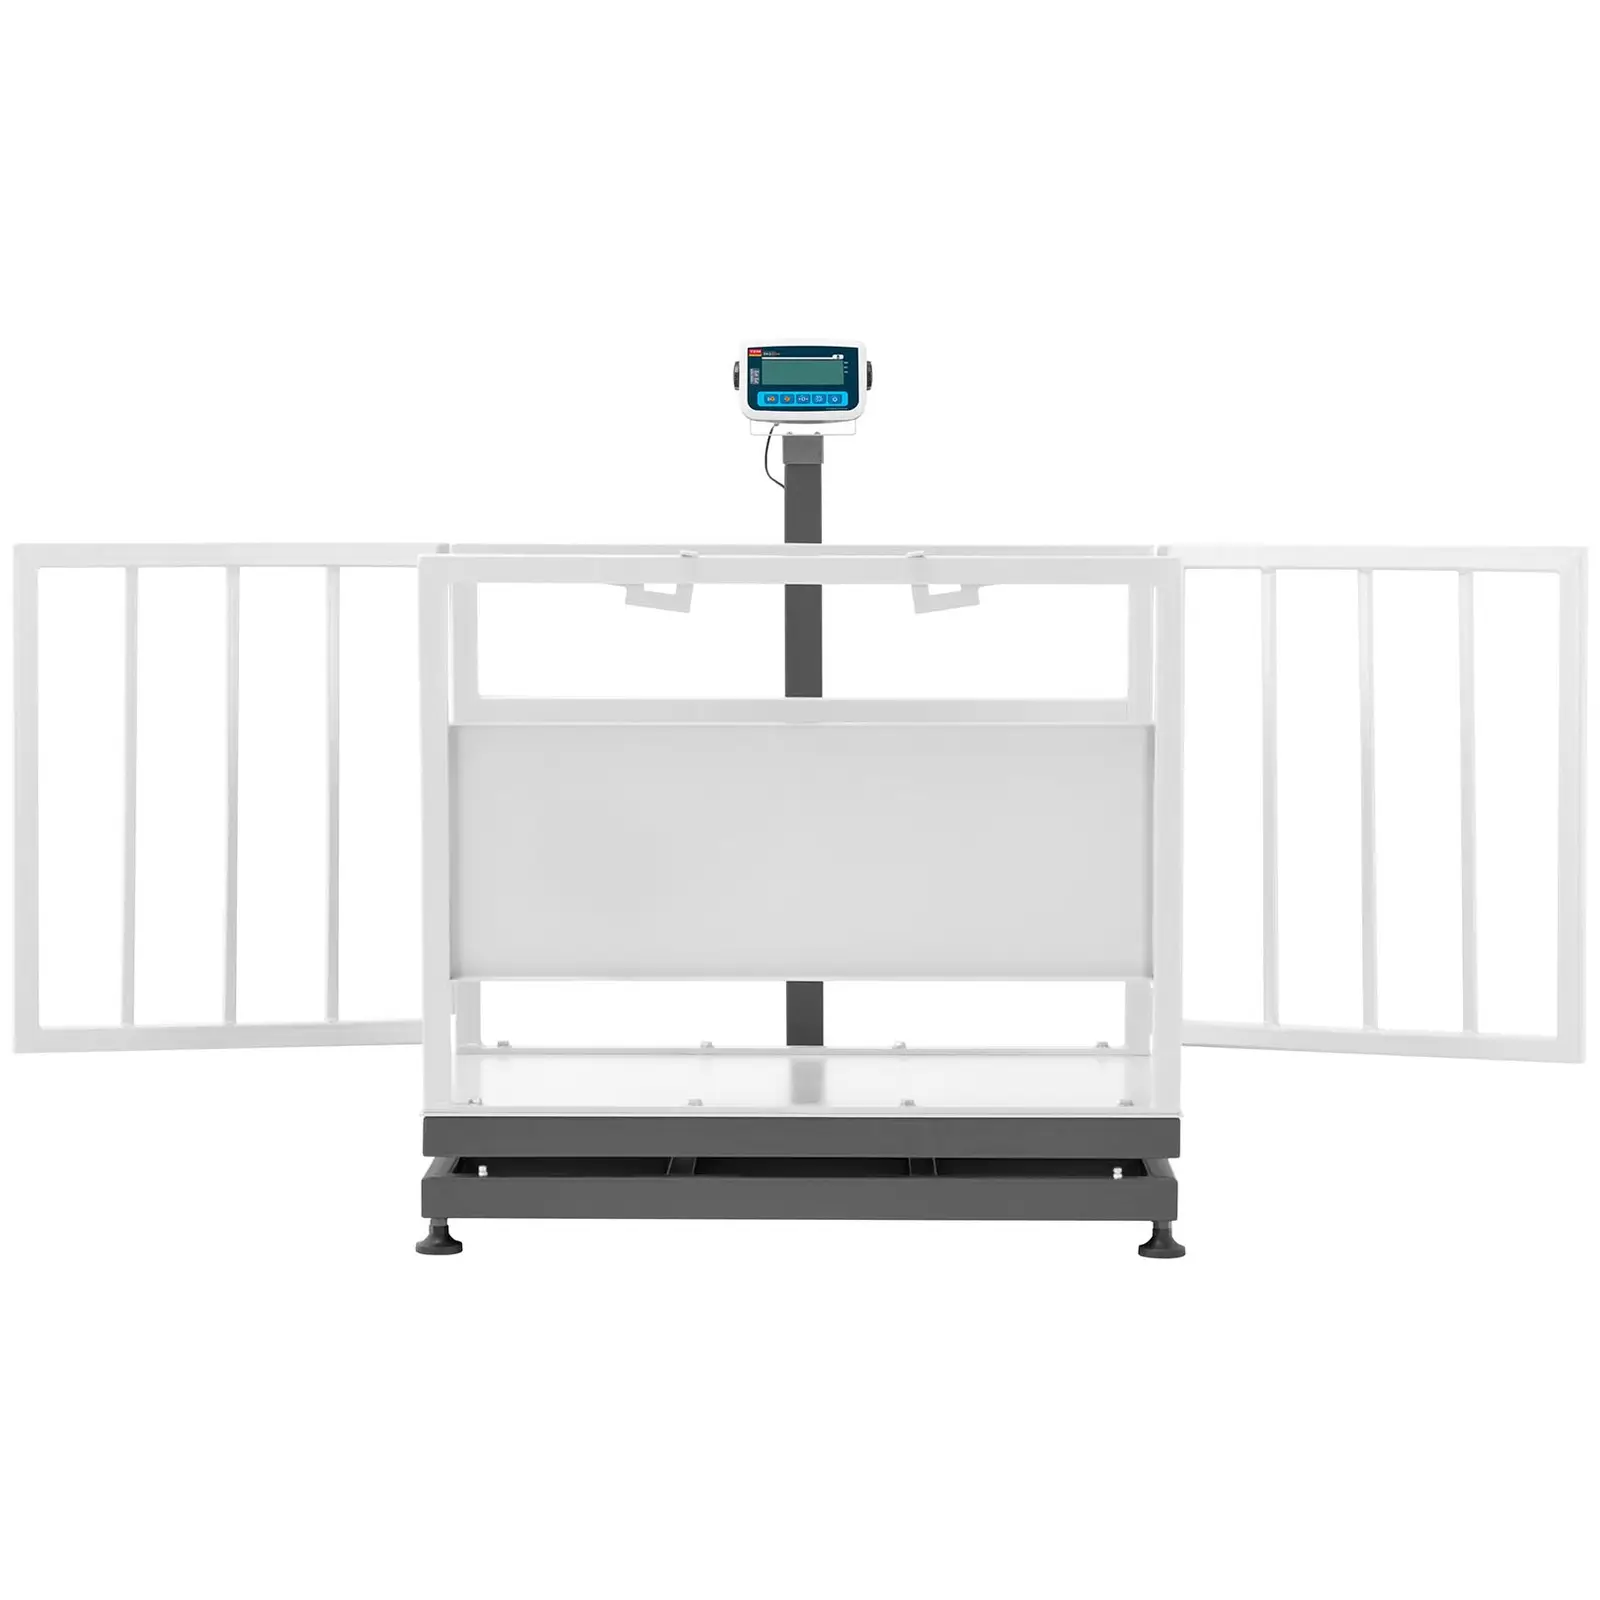 Veterinary Scale - calibrated - 300 kg / 100 g - animal-friendly with fence - LCD